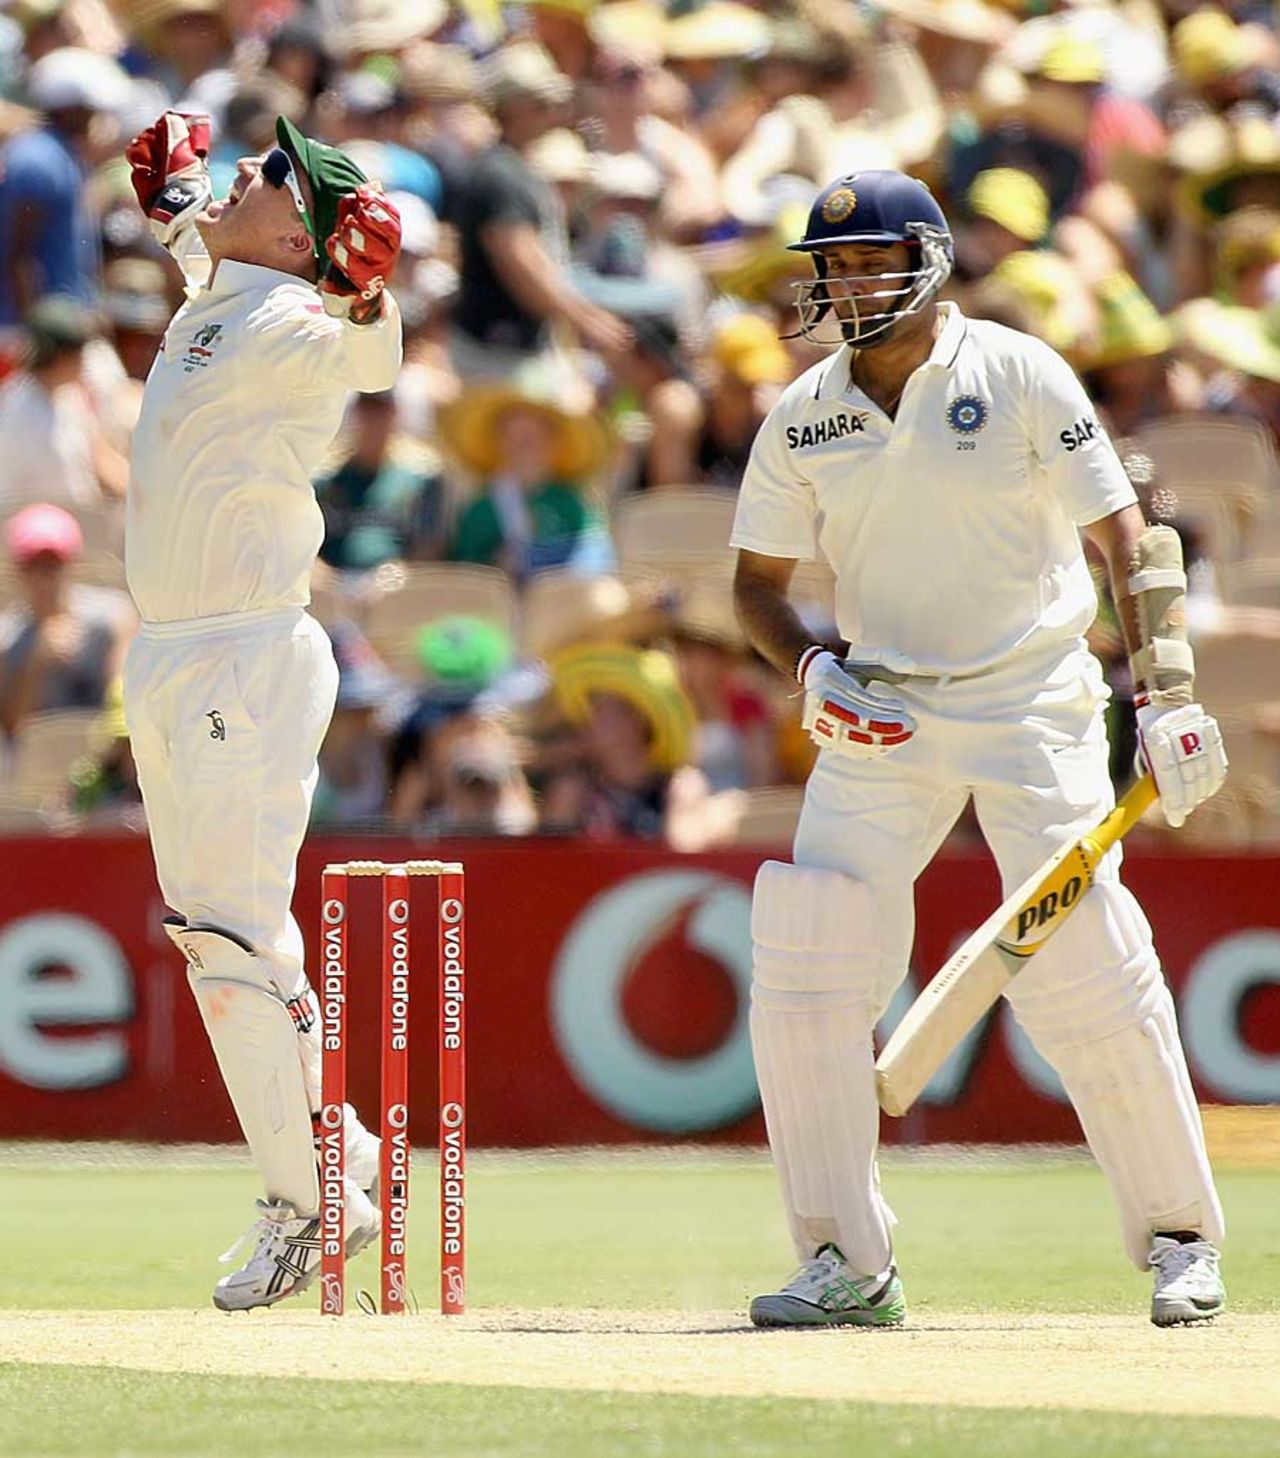 VVS Laxman was caught behind off the bowling of Nathan Lyon, Australia v India, 4th Test, Adelaide, 3rd day, January 26, 2012